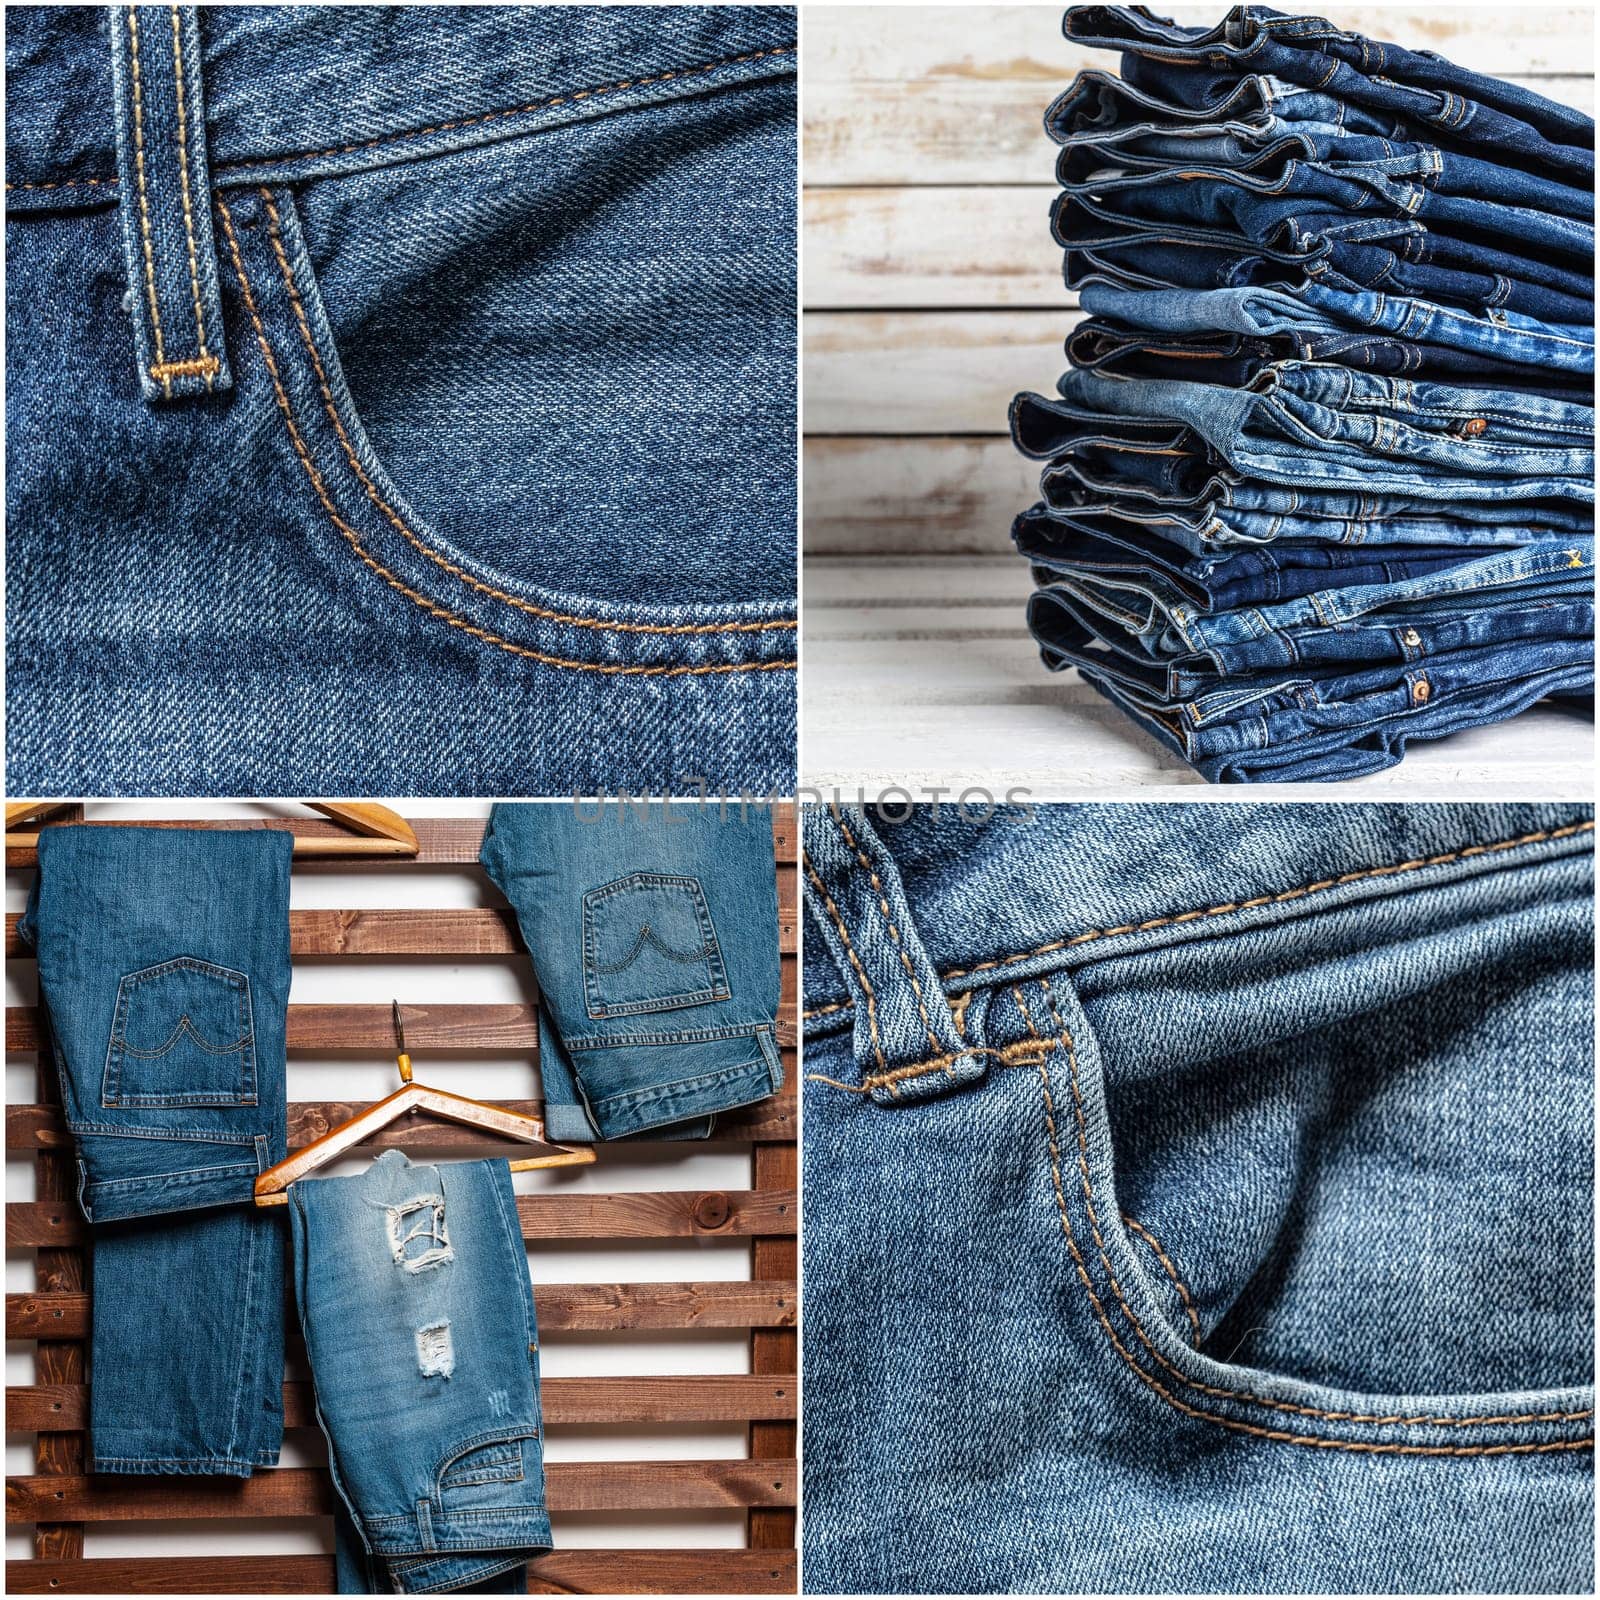 Jeans background by Fabrikasimf